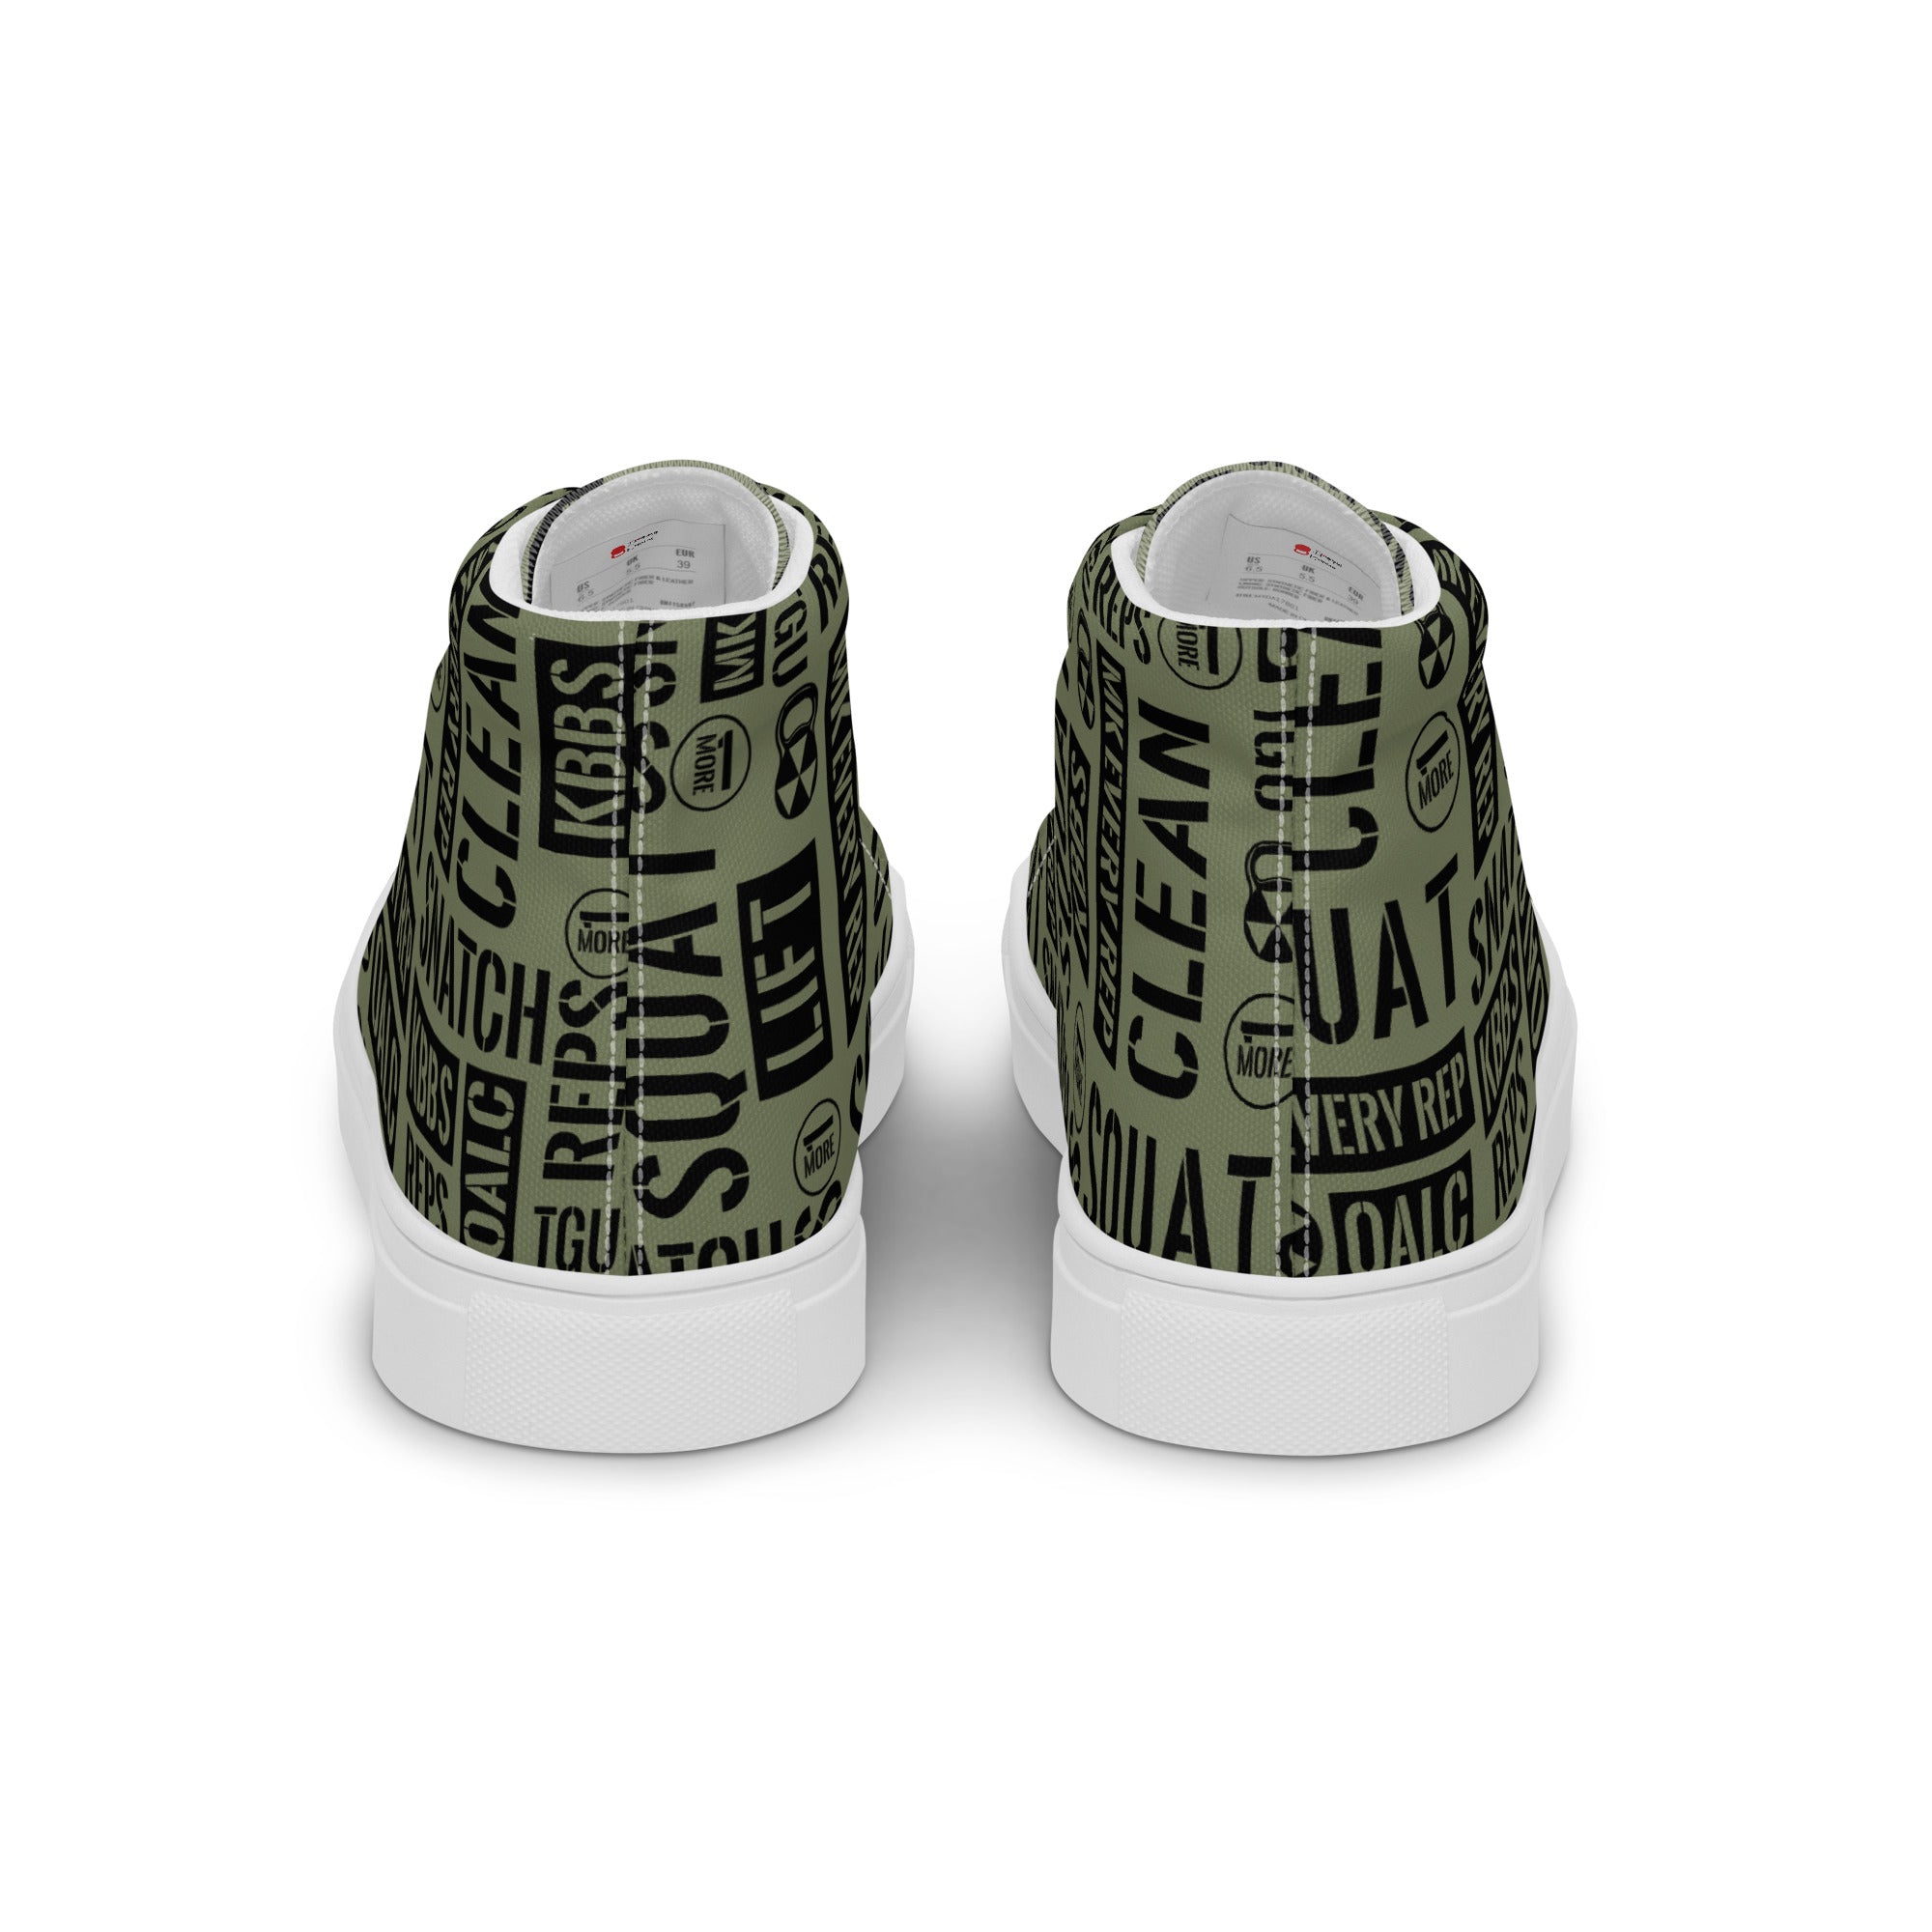 Women’s Military Green Acronyms High Tops Canvas Shoes